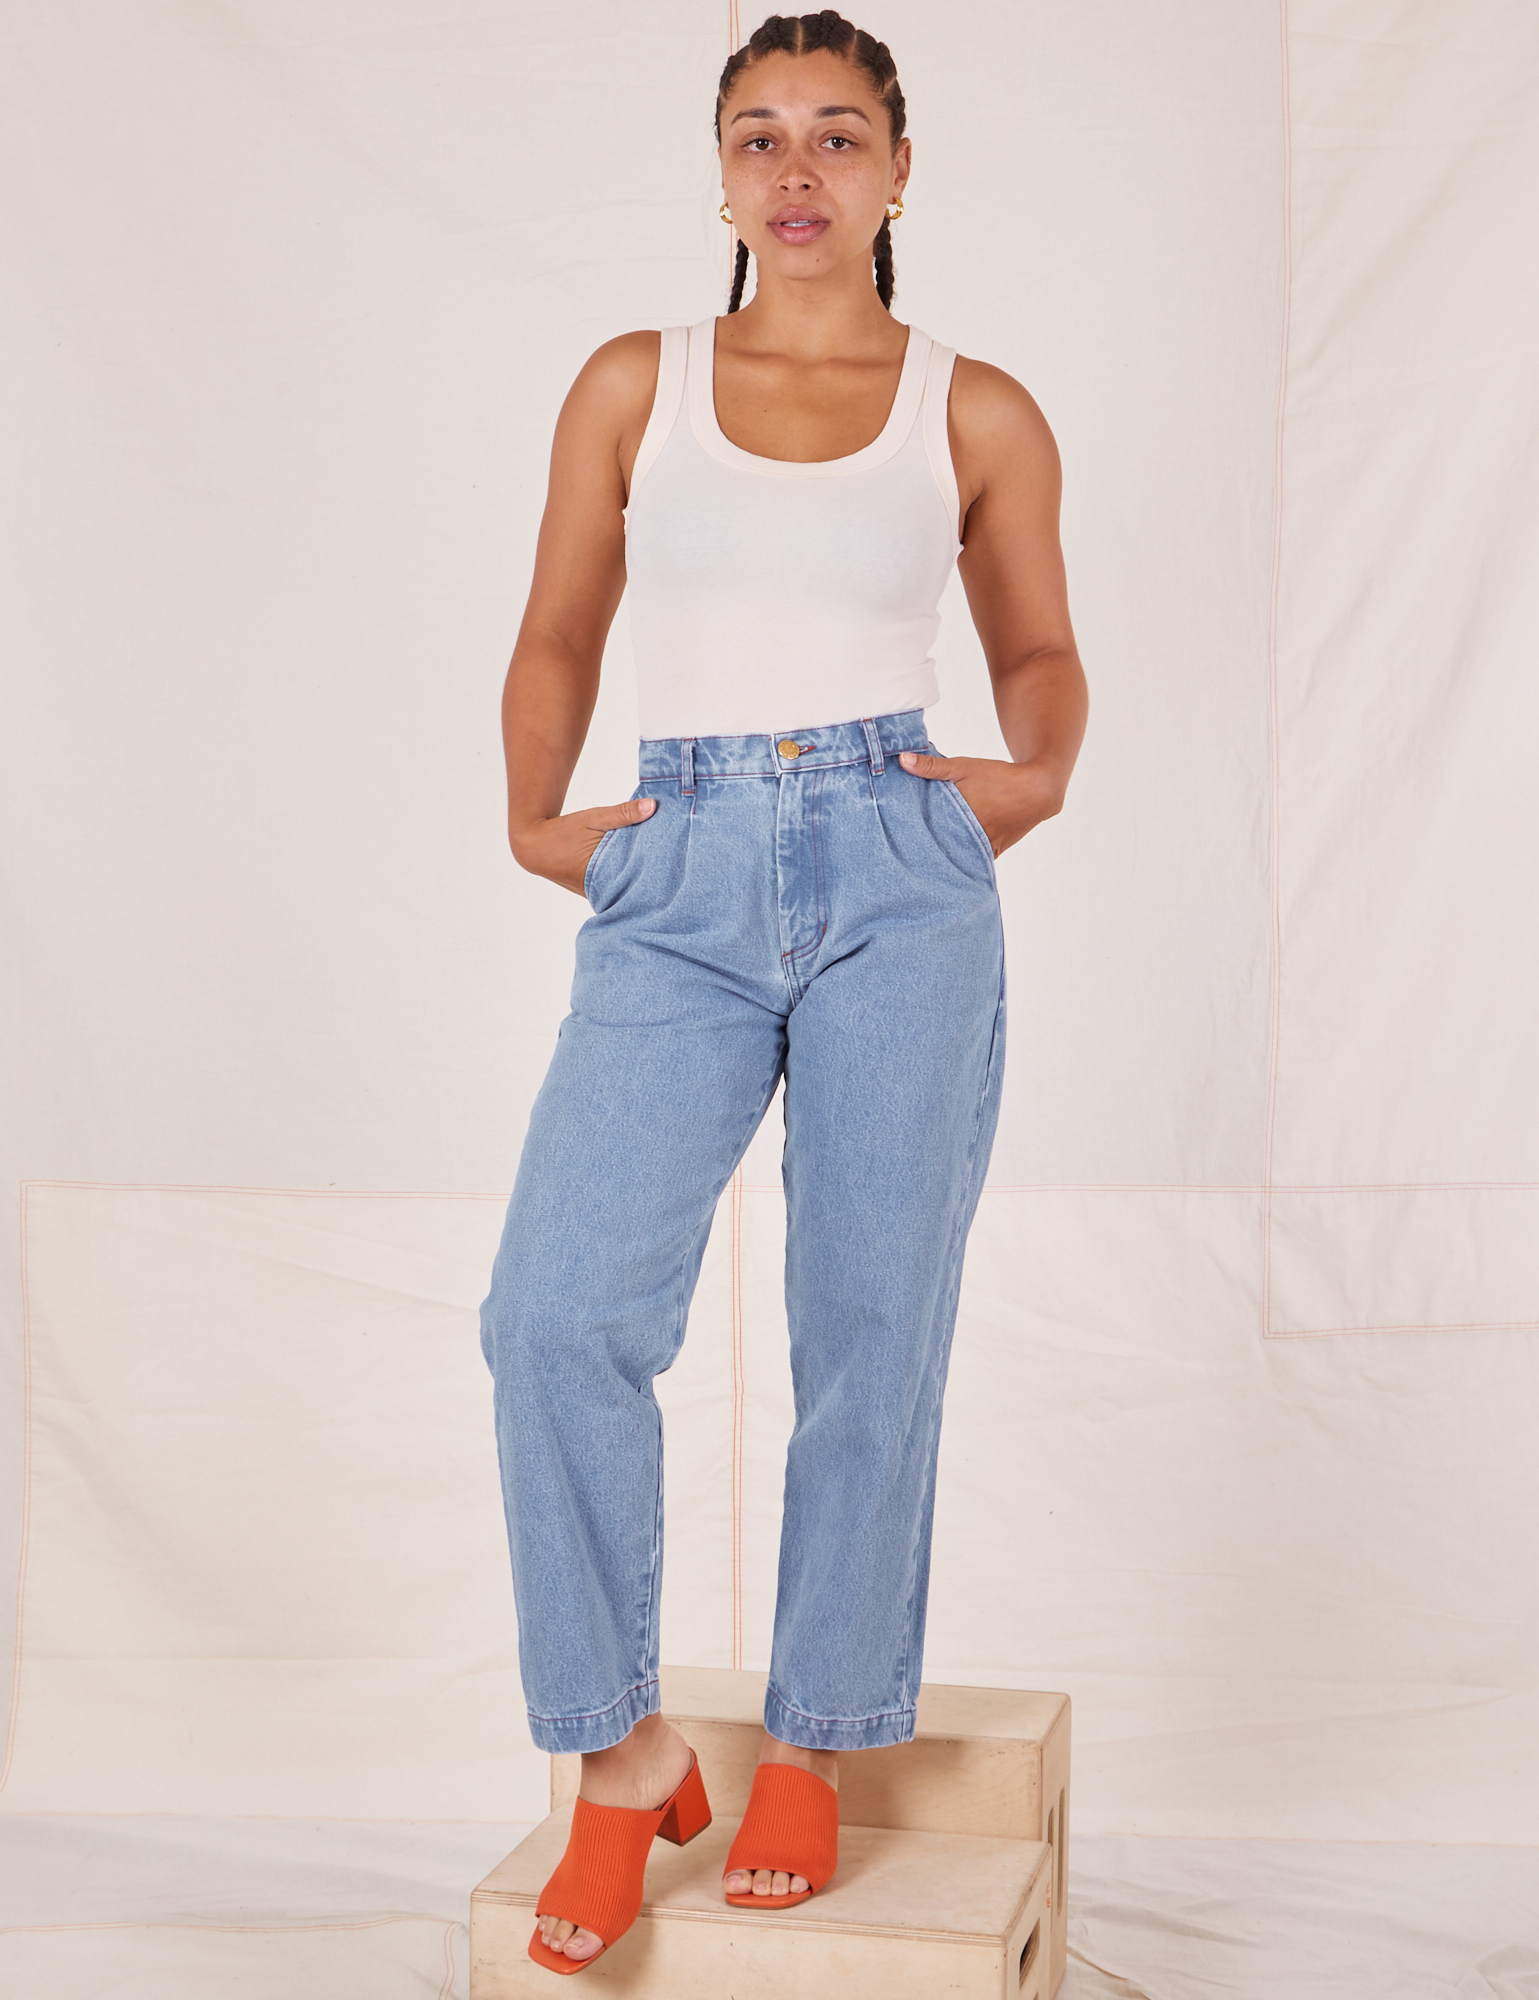 Gabi is 5&#39;7&quot; and wearing XXS Denim Trouser Jeans in Light Wash paired with Tank Top in vintage tee off-white